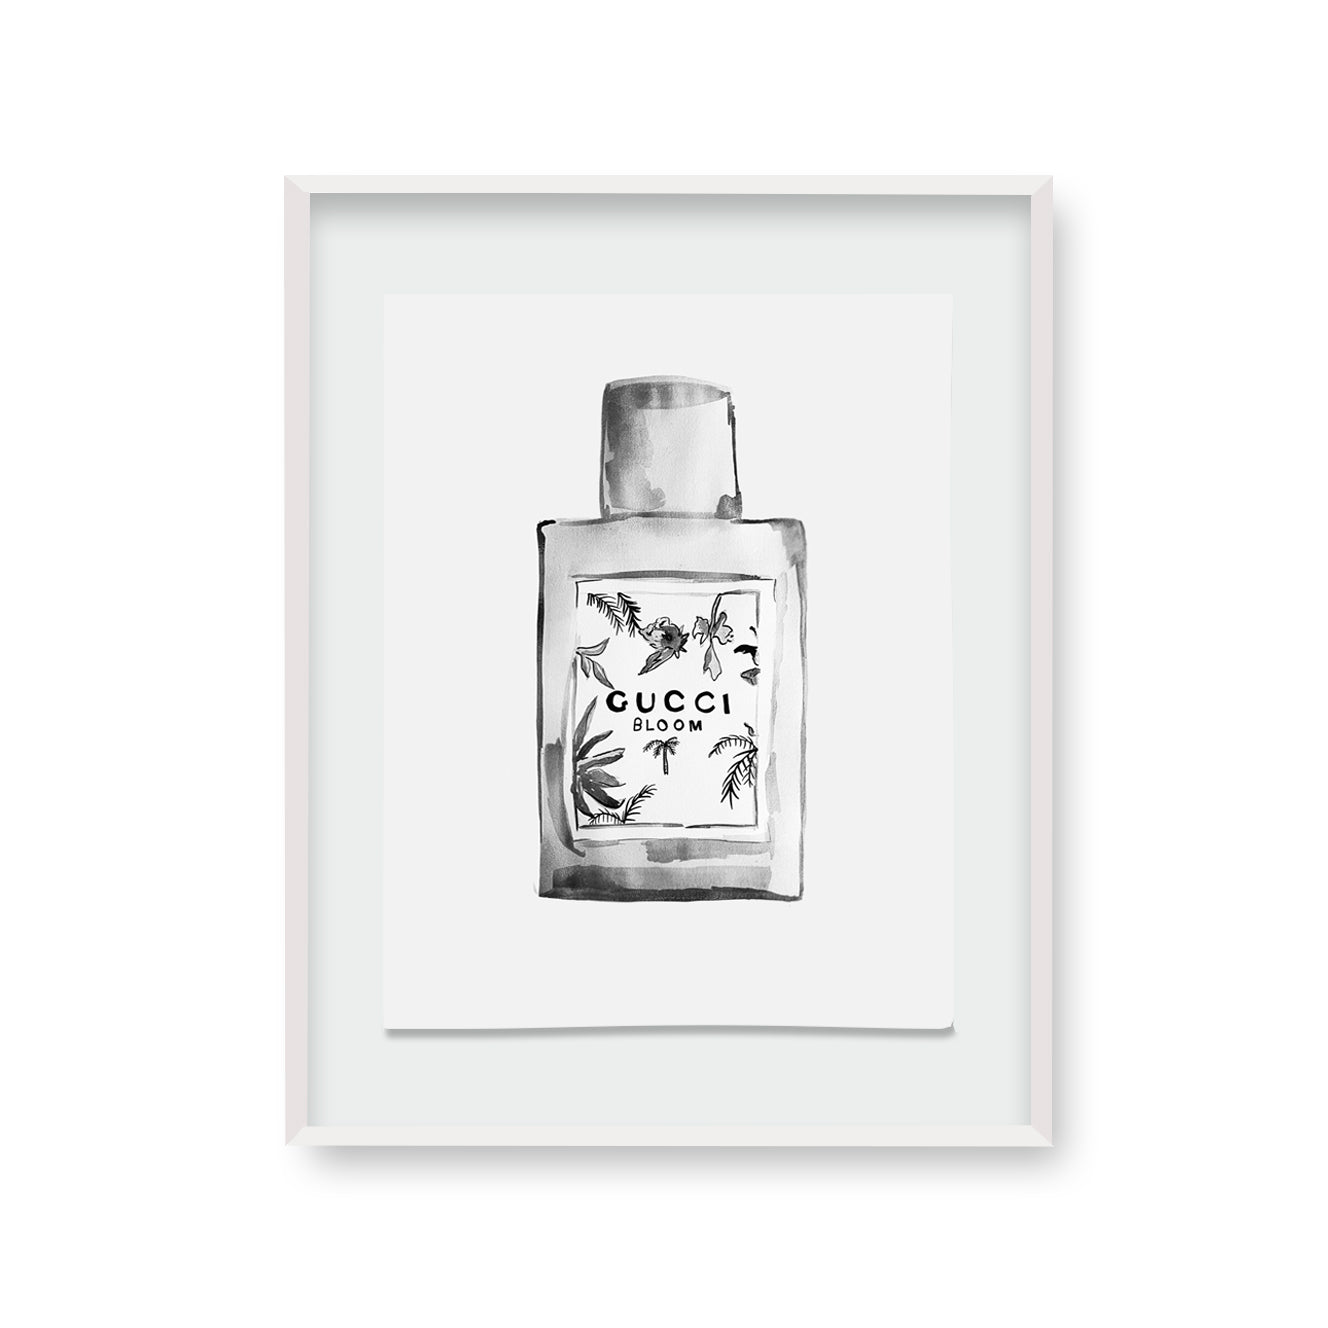 Signature Gucci Bloom Ink Palm | made to order with artist Libby Watkins